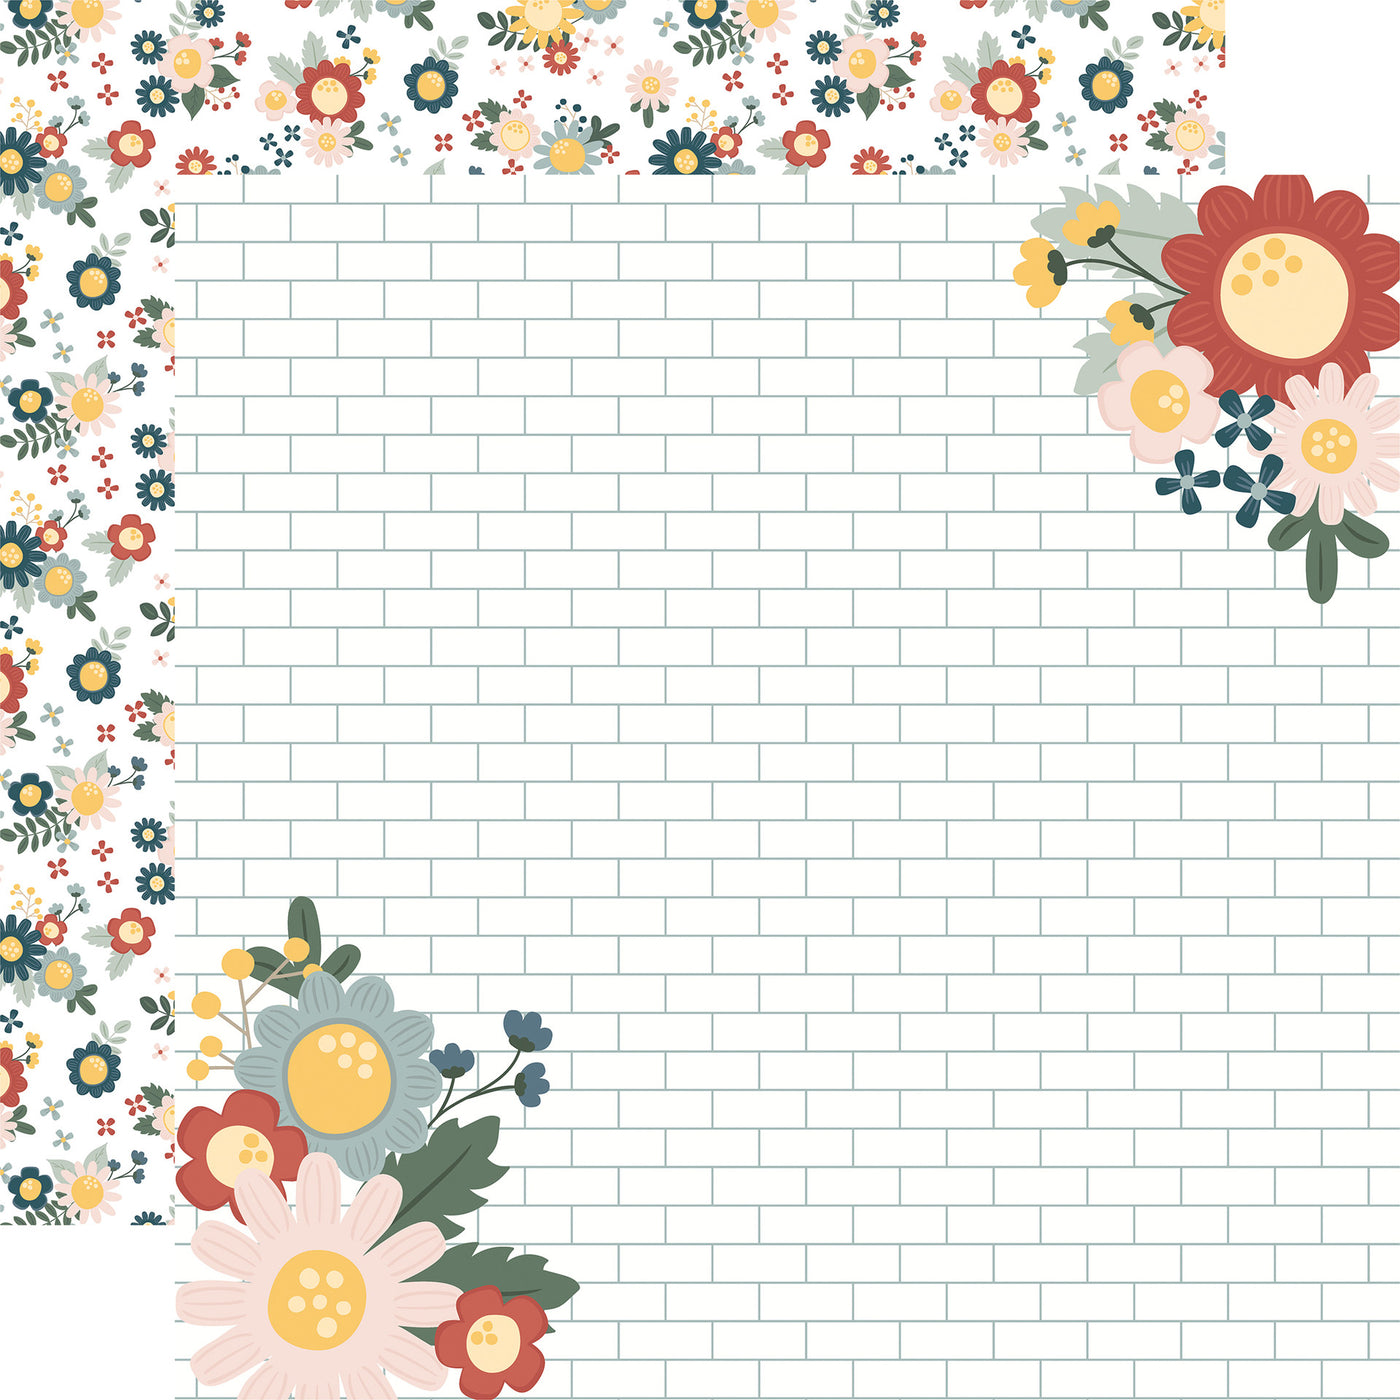 12x12 double-sided patterned paper. (Side A - blue, yellow, green, and pink floral in the corners on a white subway tile background; Side B - matching flowers on a white background)